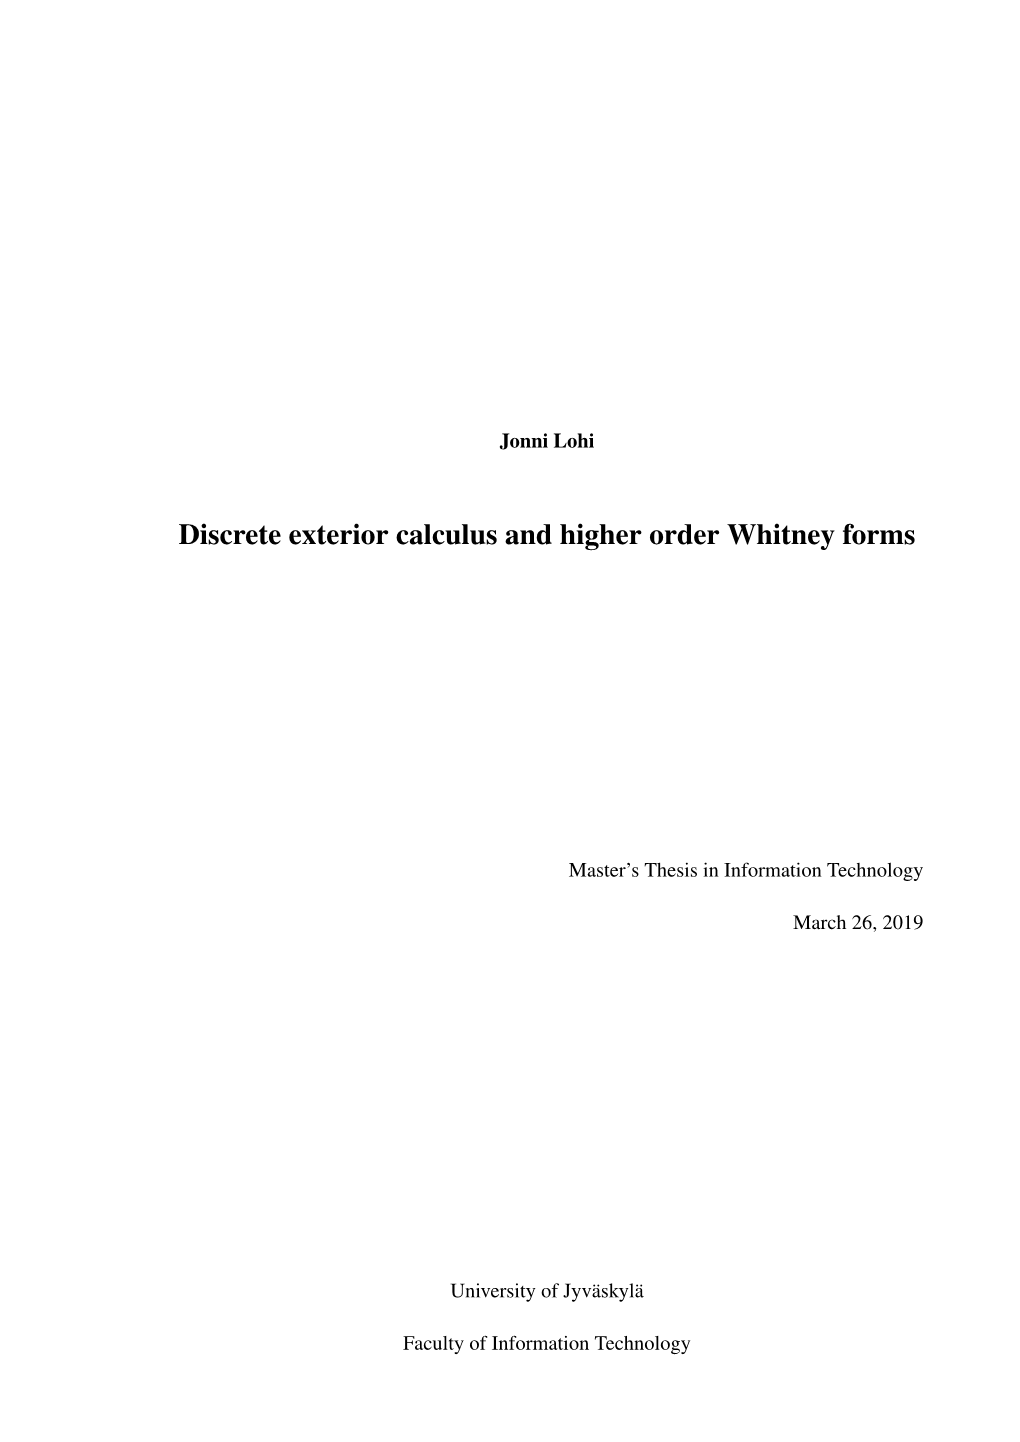 Discrete Exterior Calculus and Higher Order Whitney Forms